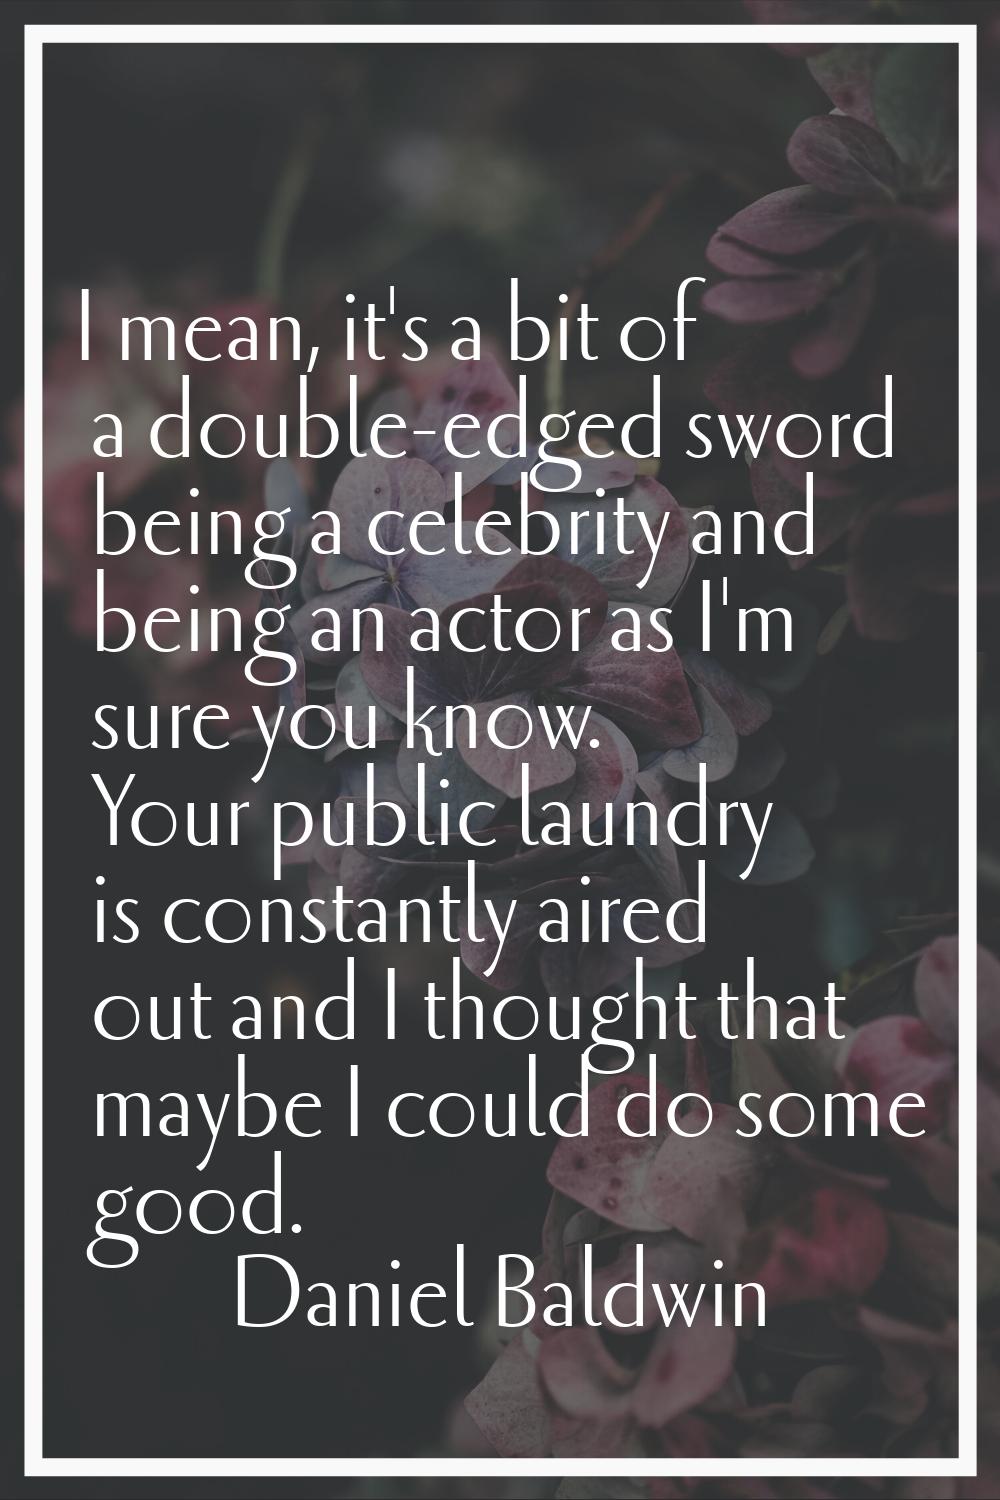 I mean, it's a bit of a double-edged sword being a celebrity and being an actor as I'm sure you kno